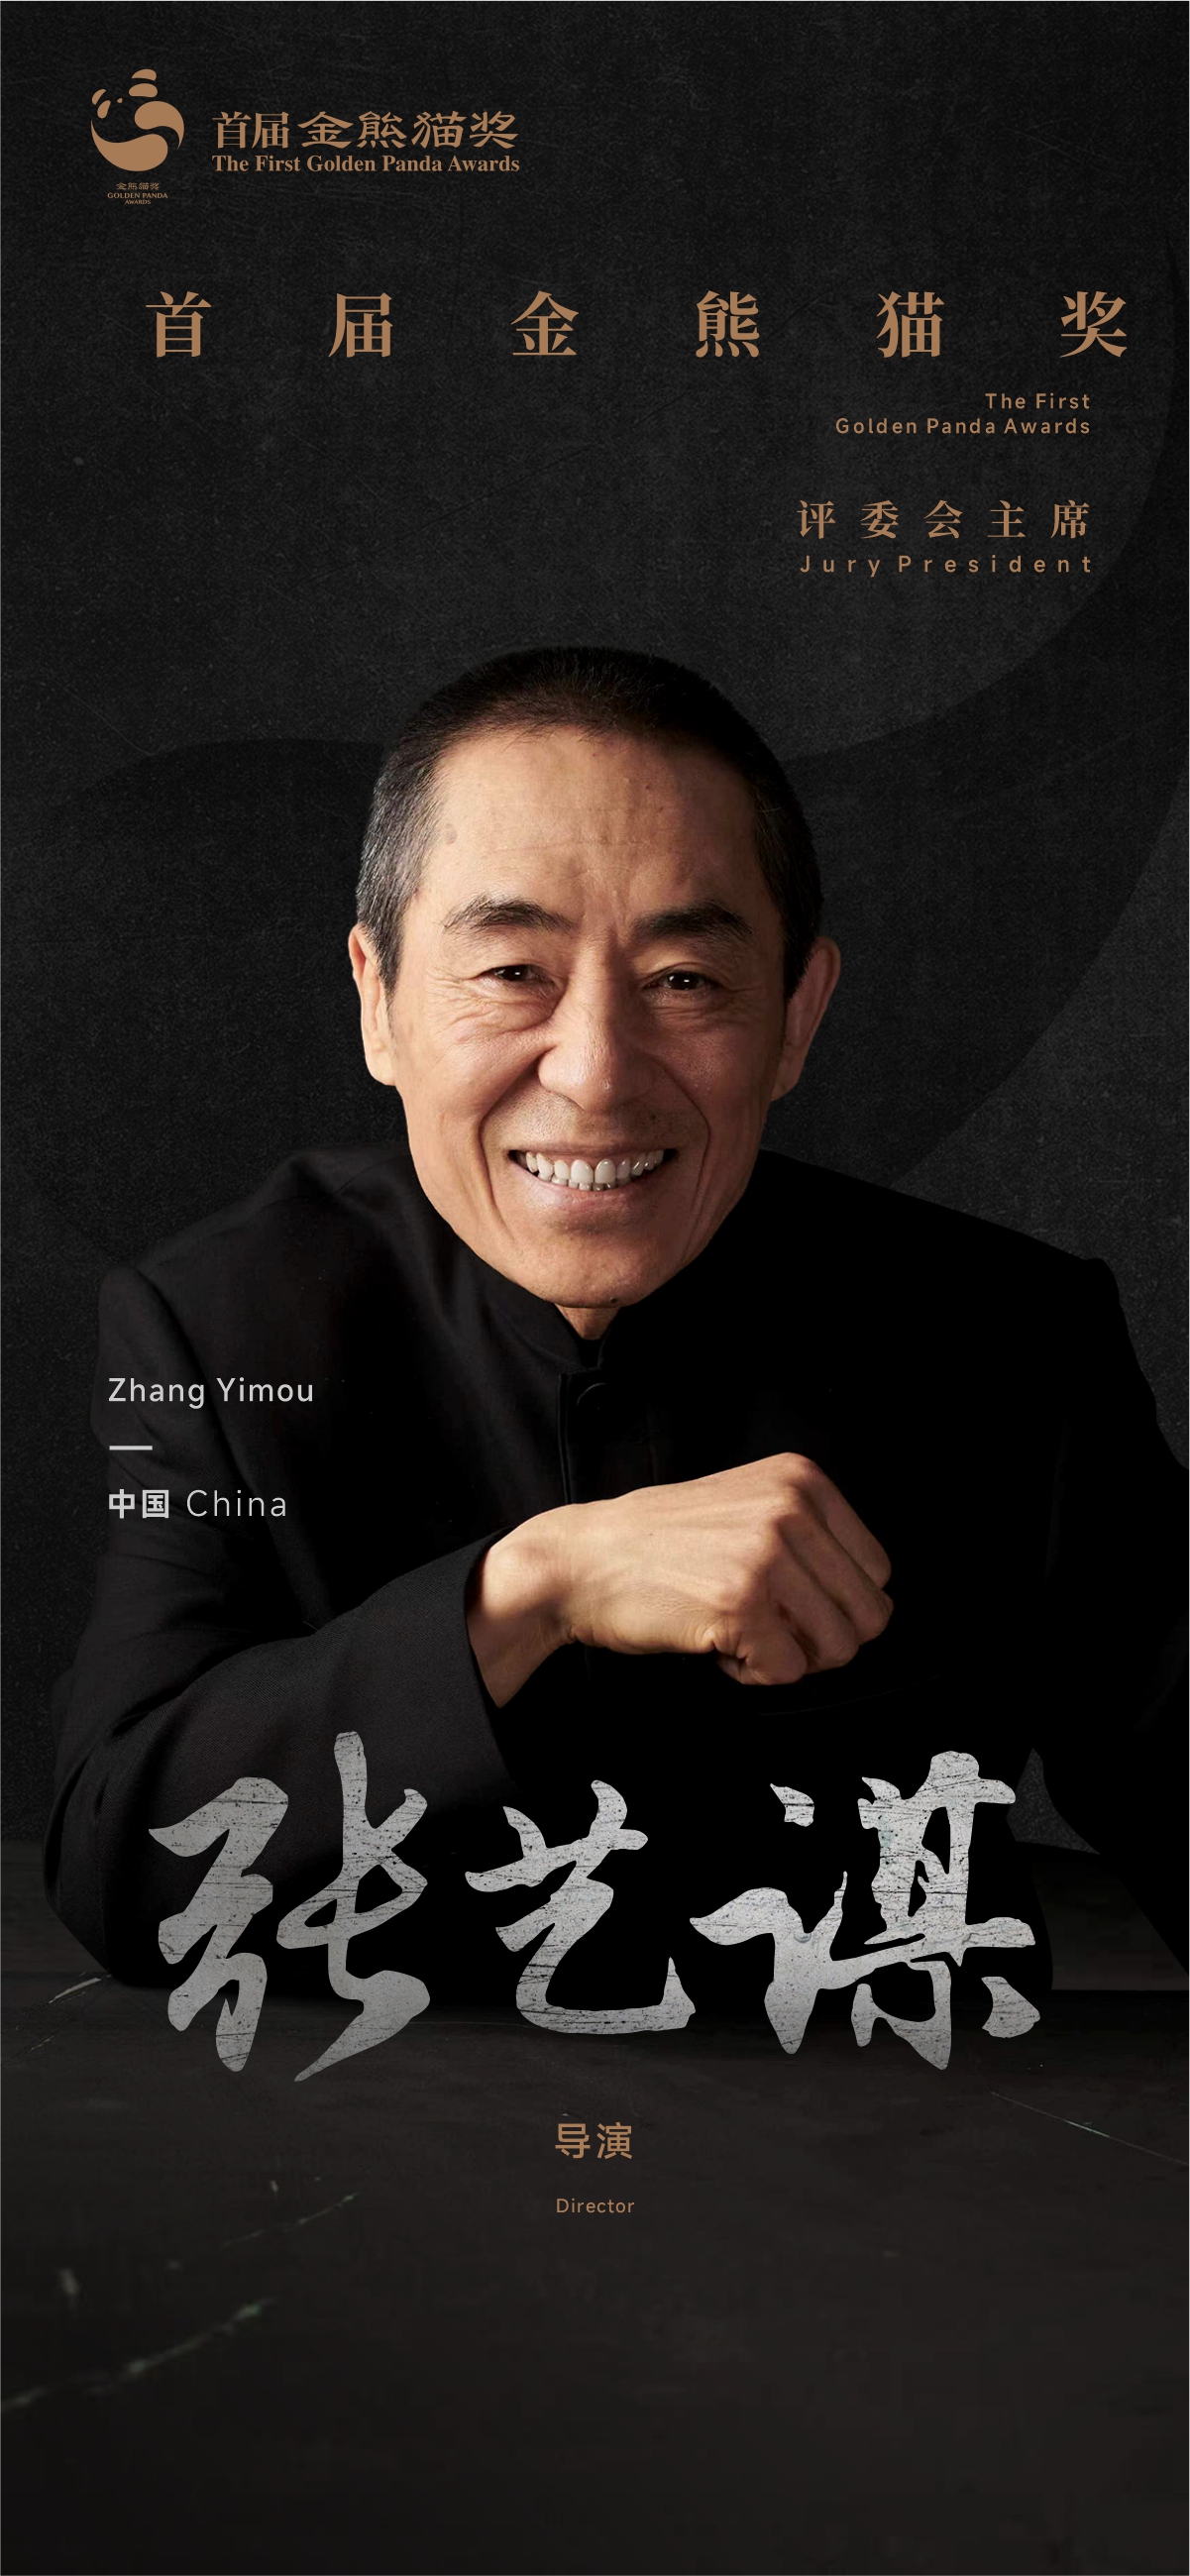 Zhang Yimou, the esteemed director who has won prestigious accolades such as Venice's Golden Lion and Berlin's Golden Bear – two of the highest honors in the global film industry, acts as jury president for the awards. /CGTN